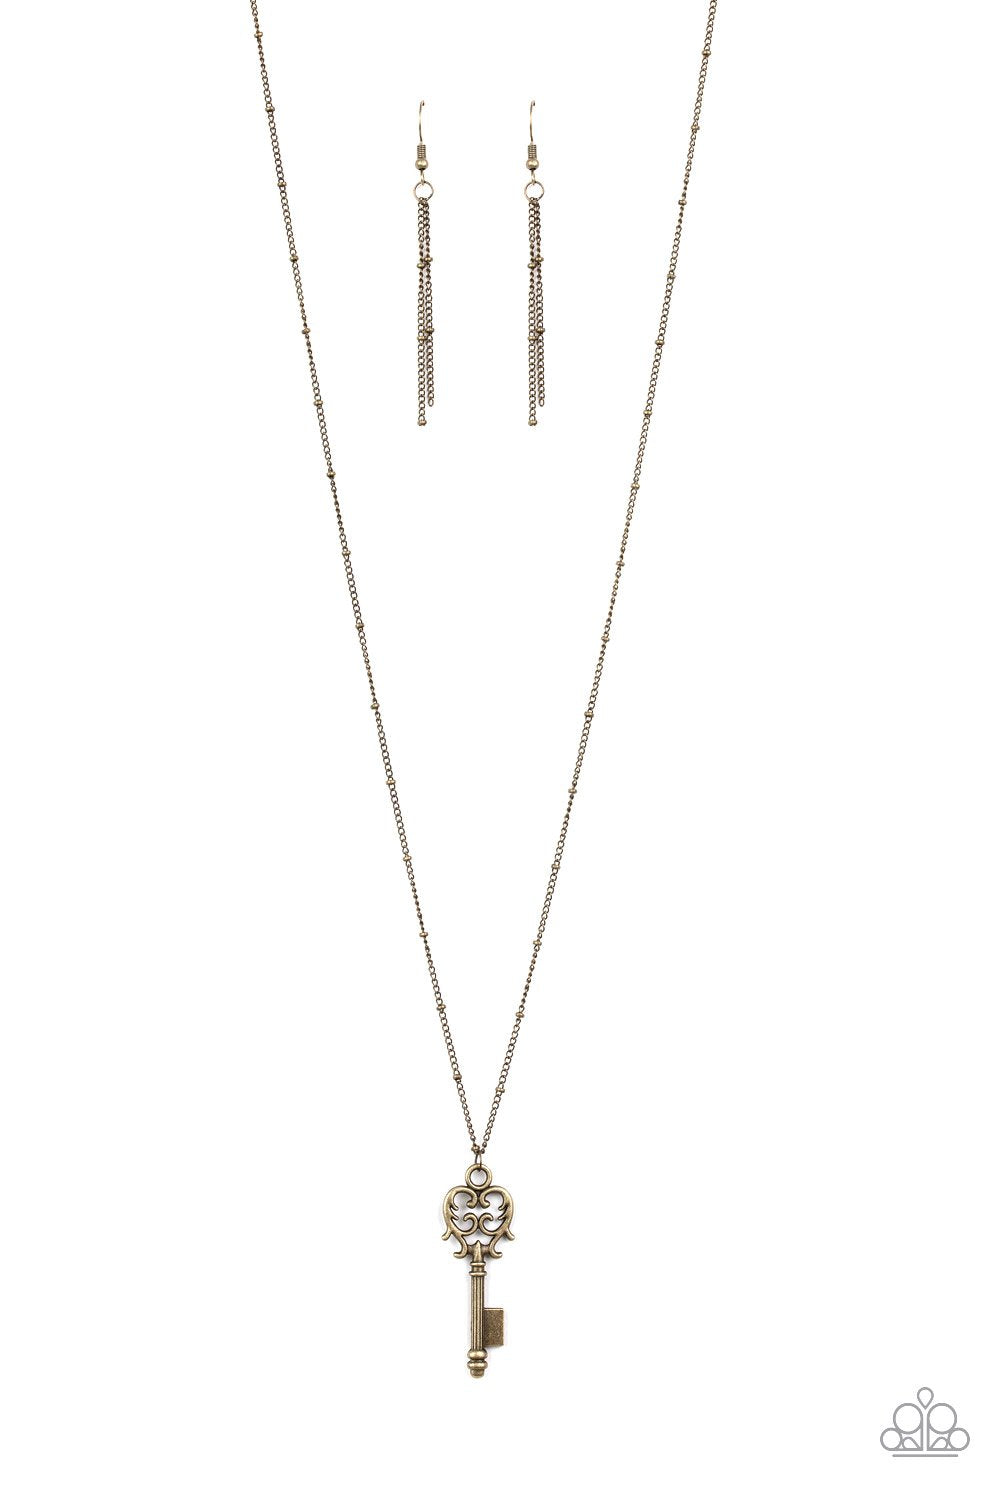 The Magic Key Brass Necklace | Paparazzi Accessories | $5.00